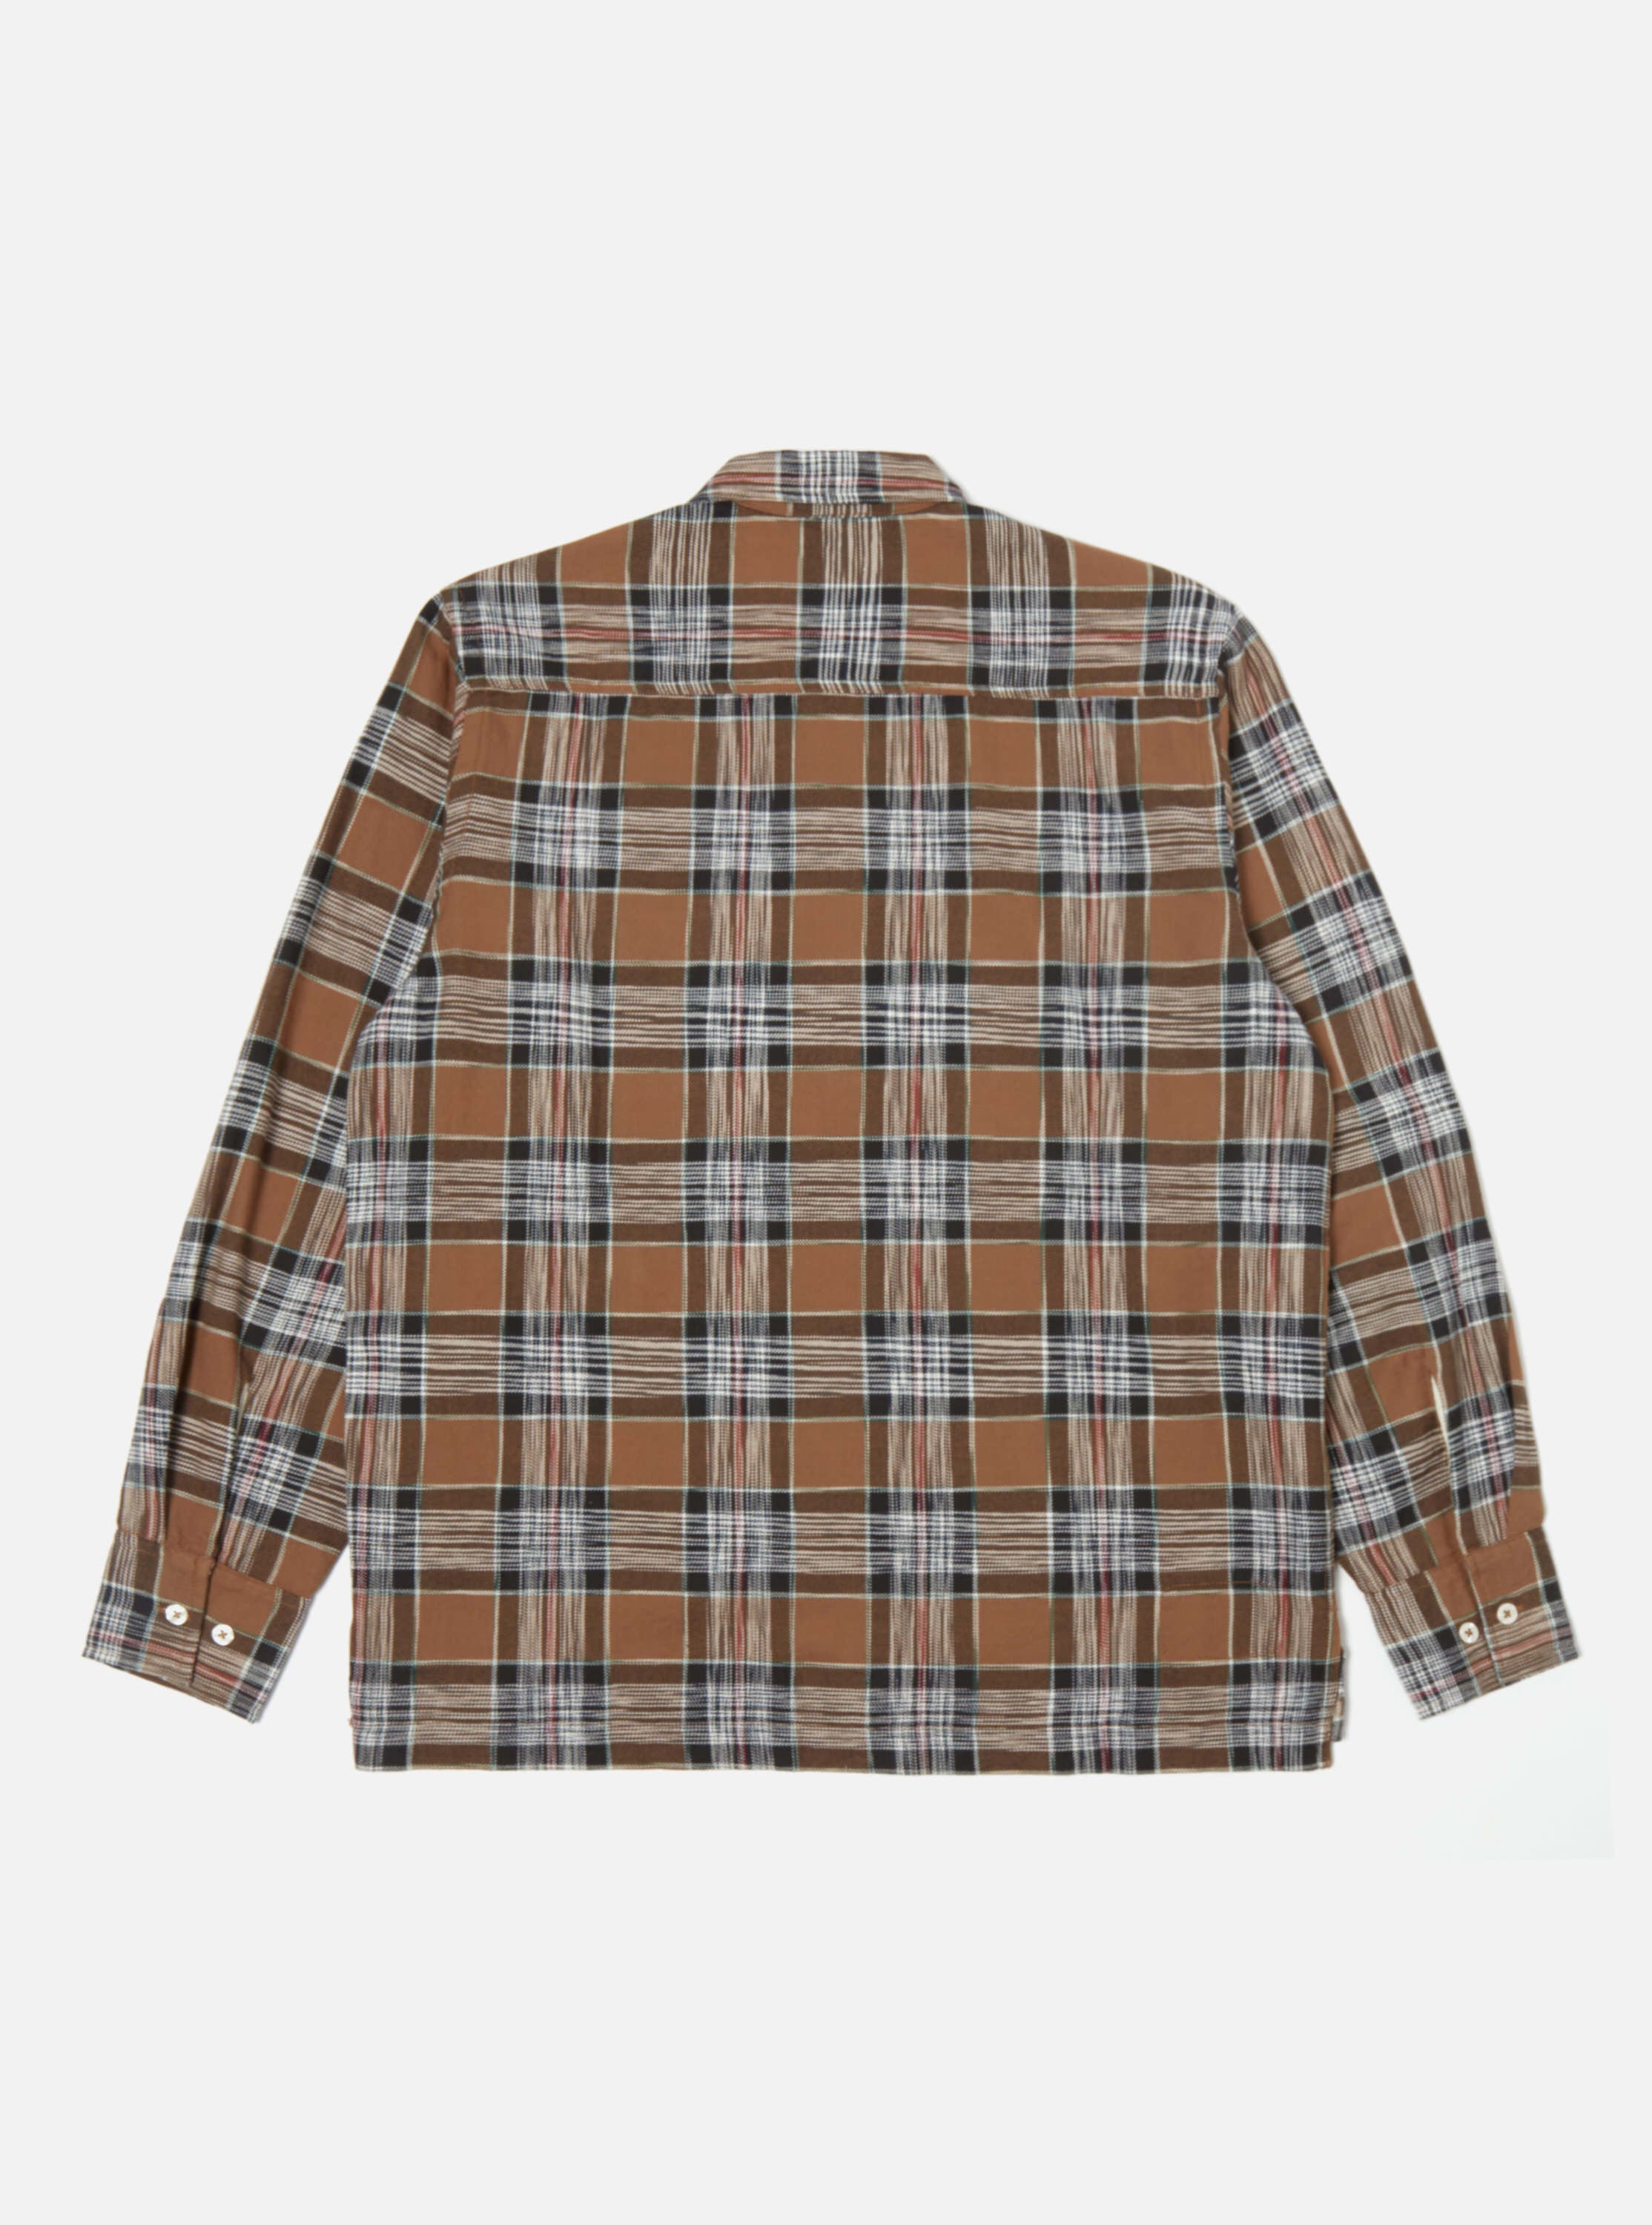 Universal Works Pullover L/S Shirt in Brown Ikat Twill Check